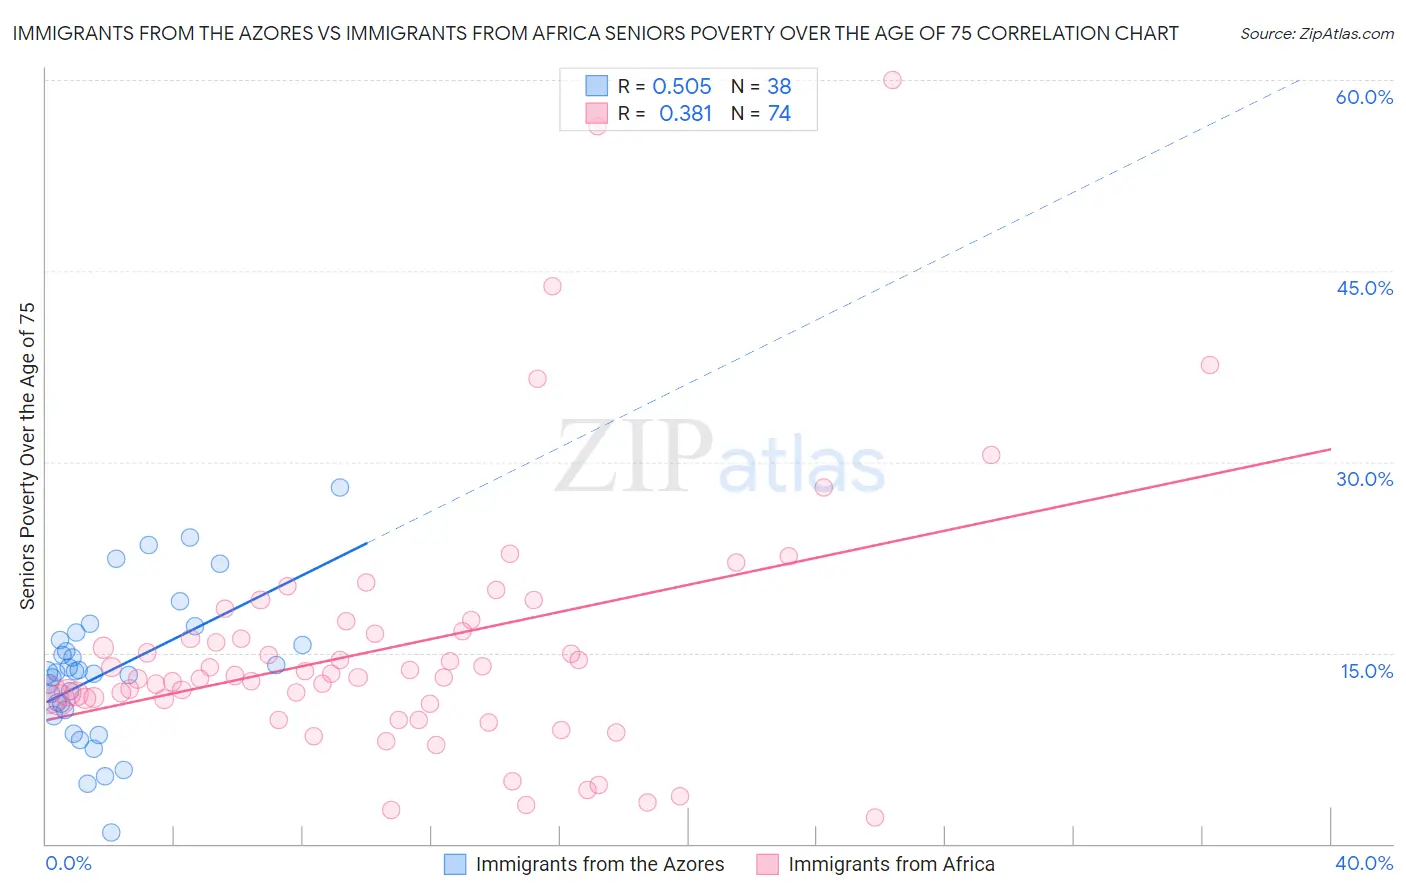 Immigrants from the Azores vs Immigrants from Africa Seniors Poverty Over the Age of 75